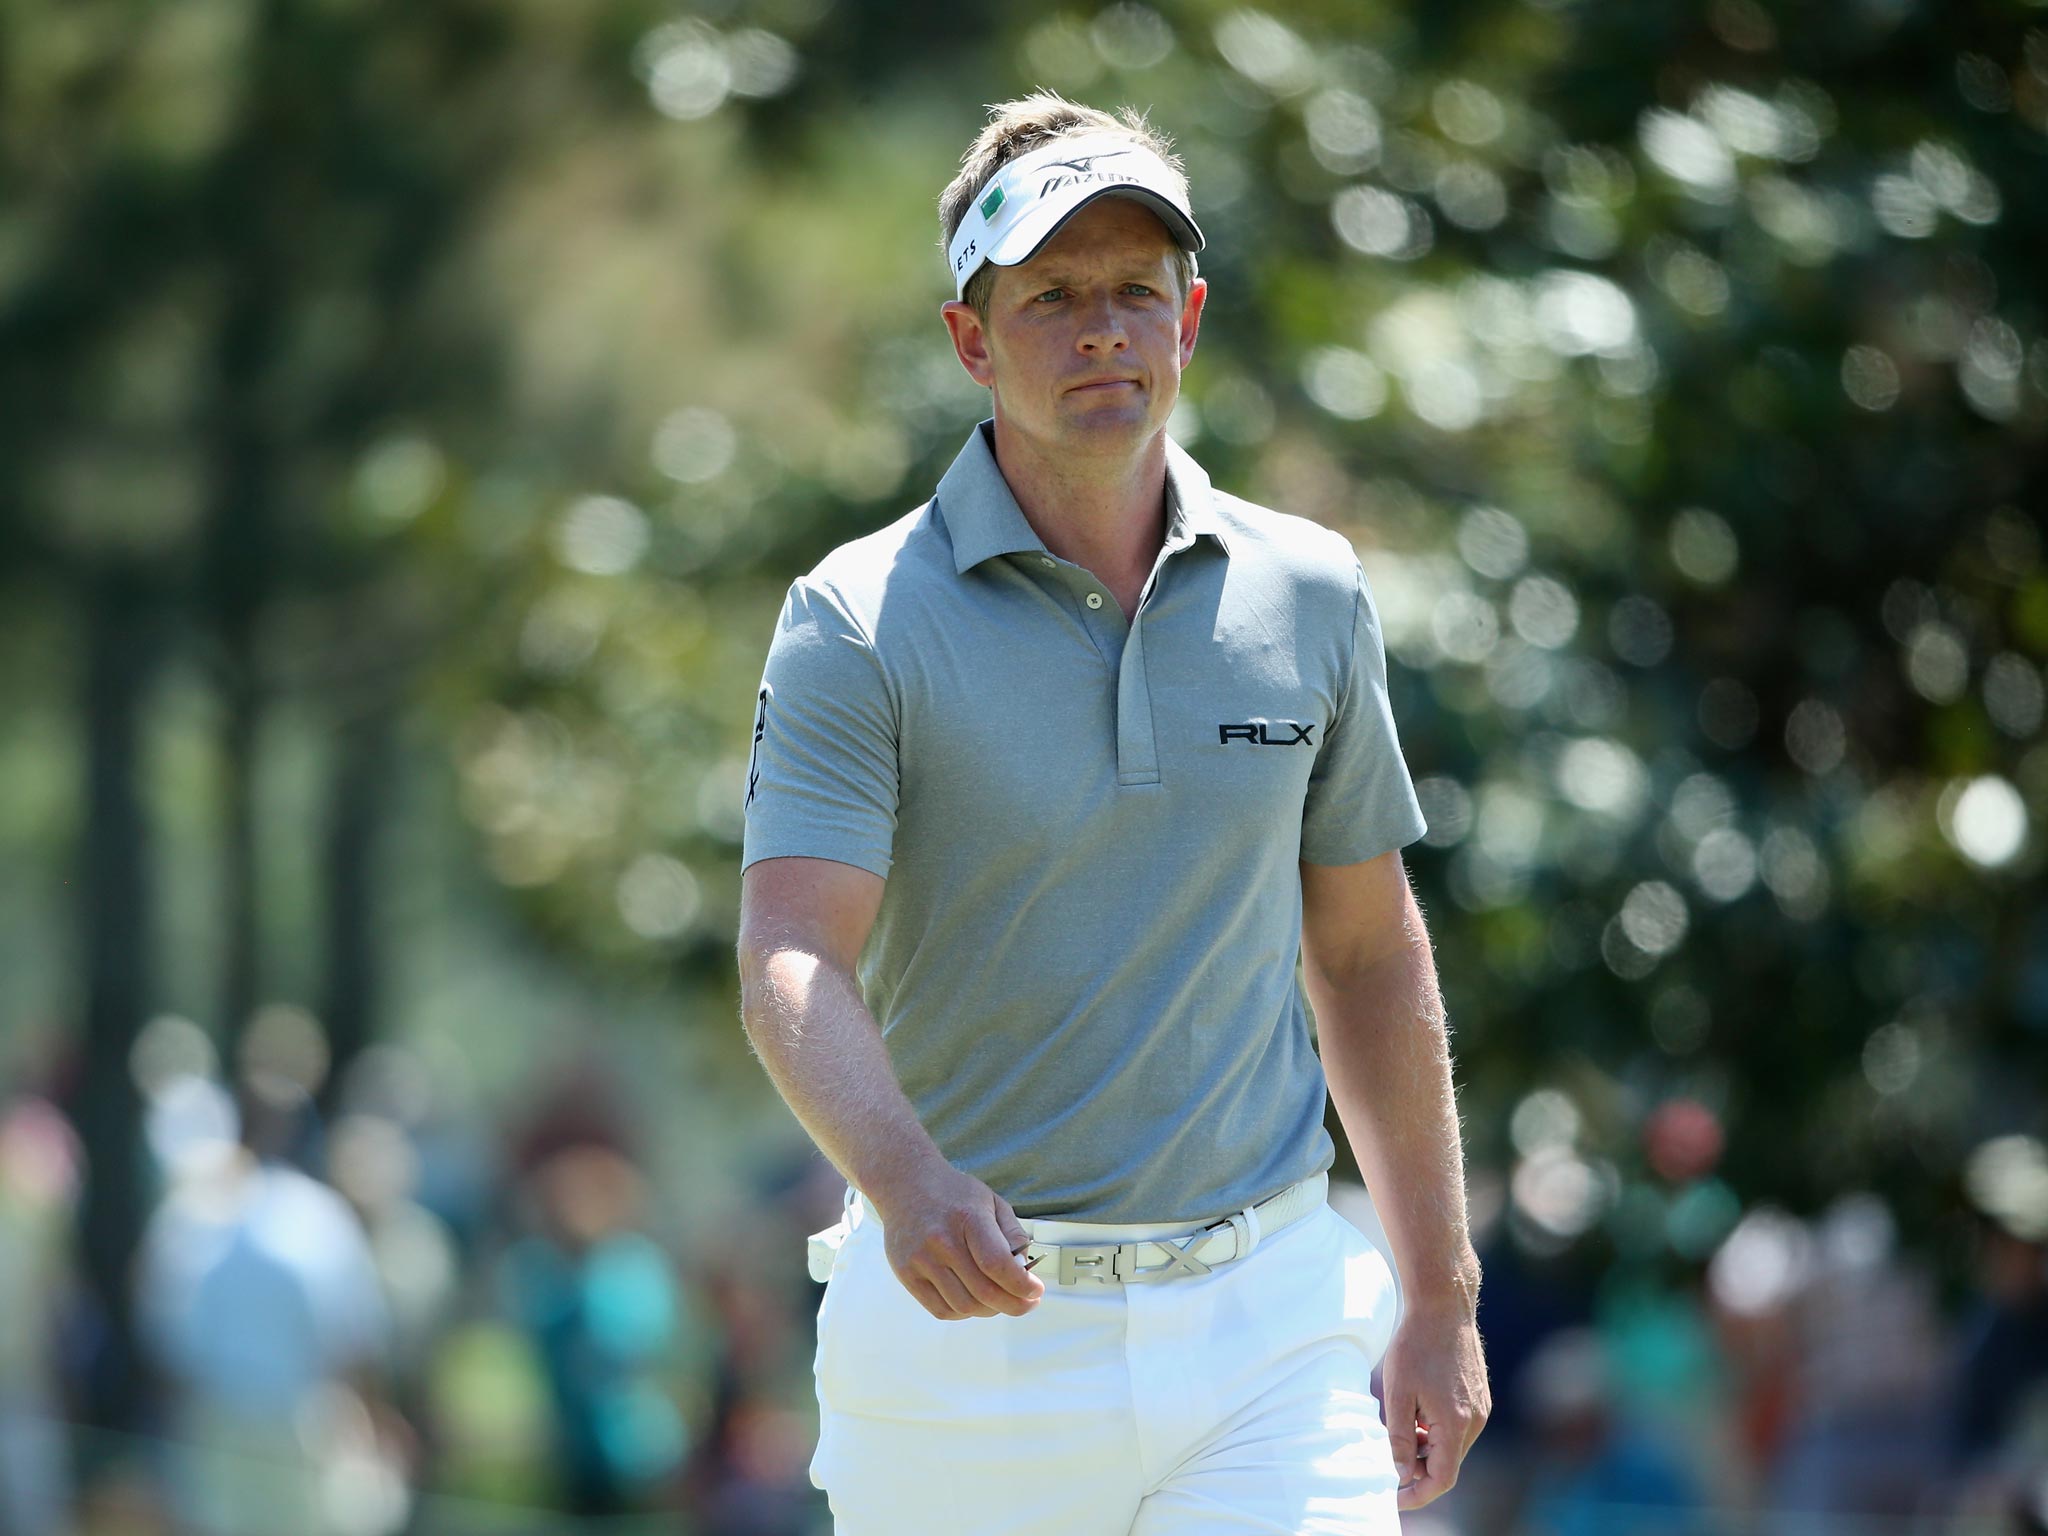 Luke Donald accepted he made a 'pretty dumb mistake' in touching the sand after a bunker shot during his opening round 79 at the Masters